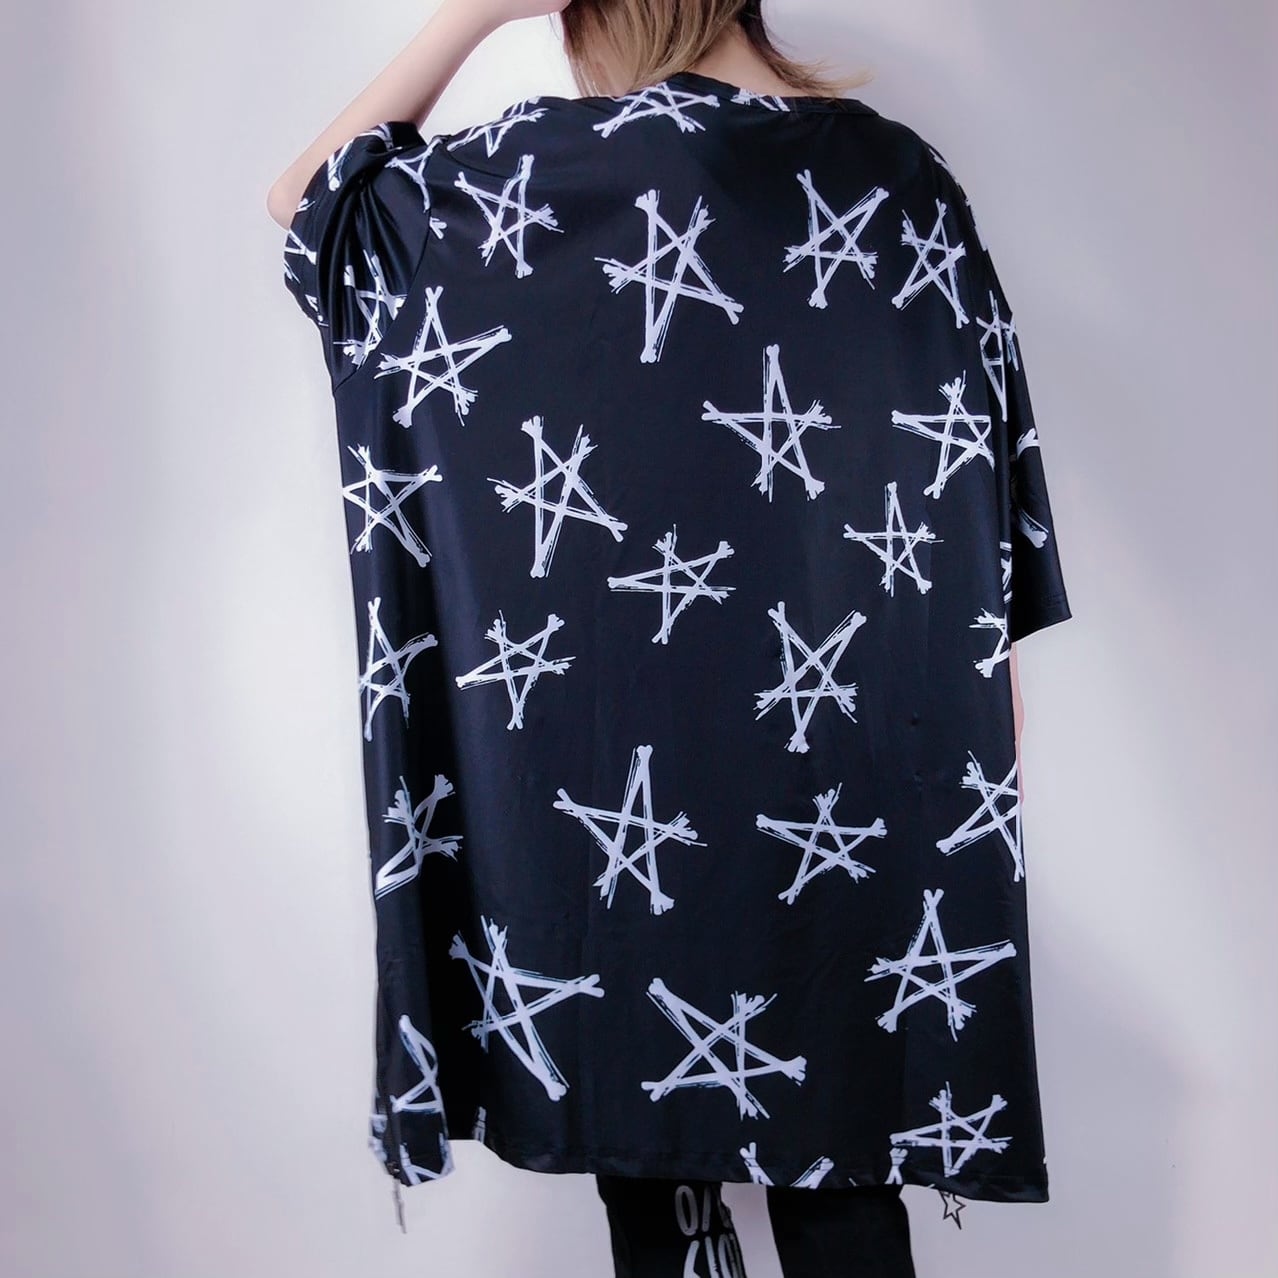 OVERSIZE SIDE ZIP【NieR STAR】 | NIER CLOTHING powered by BASE